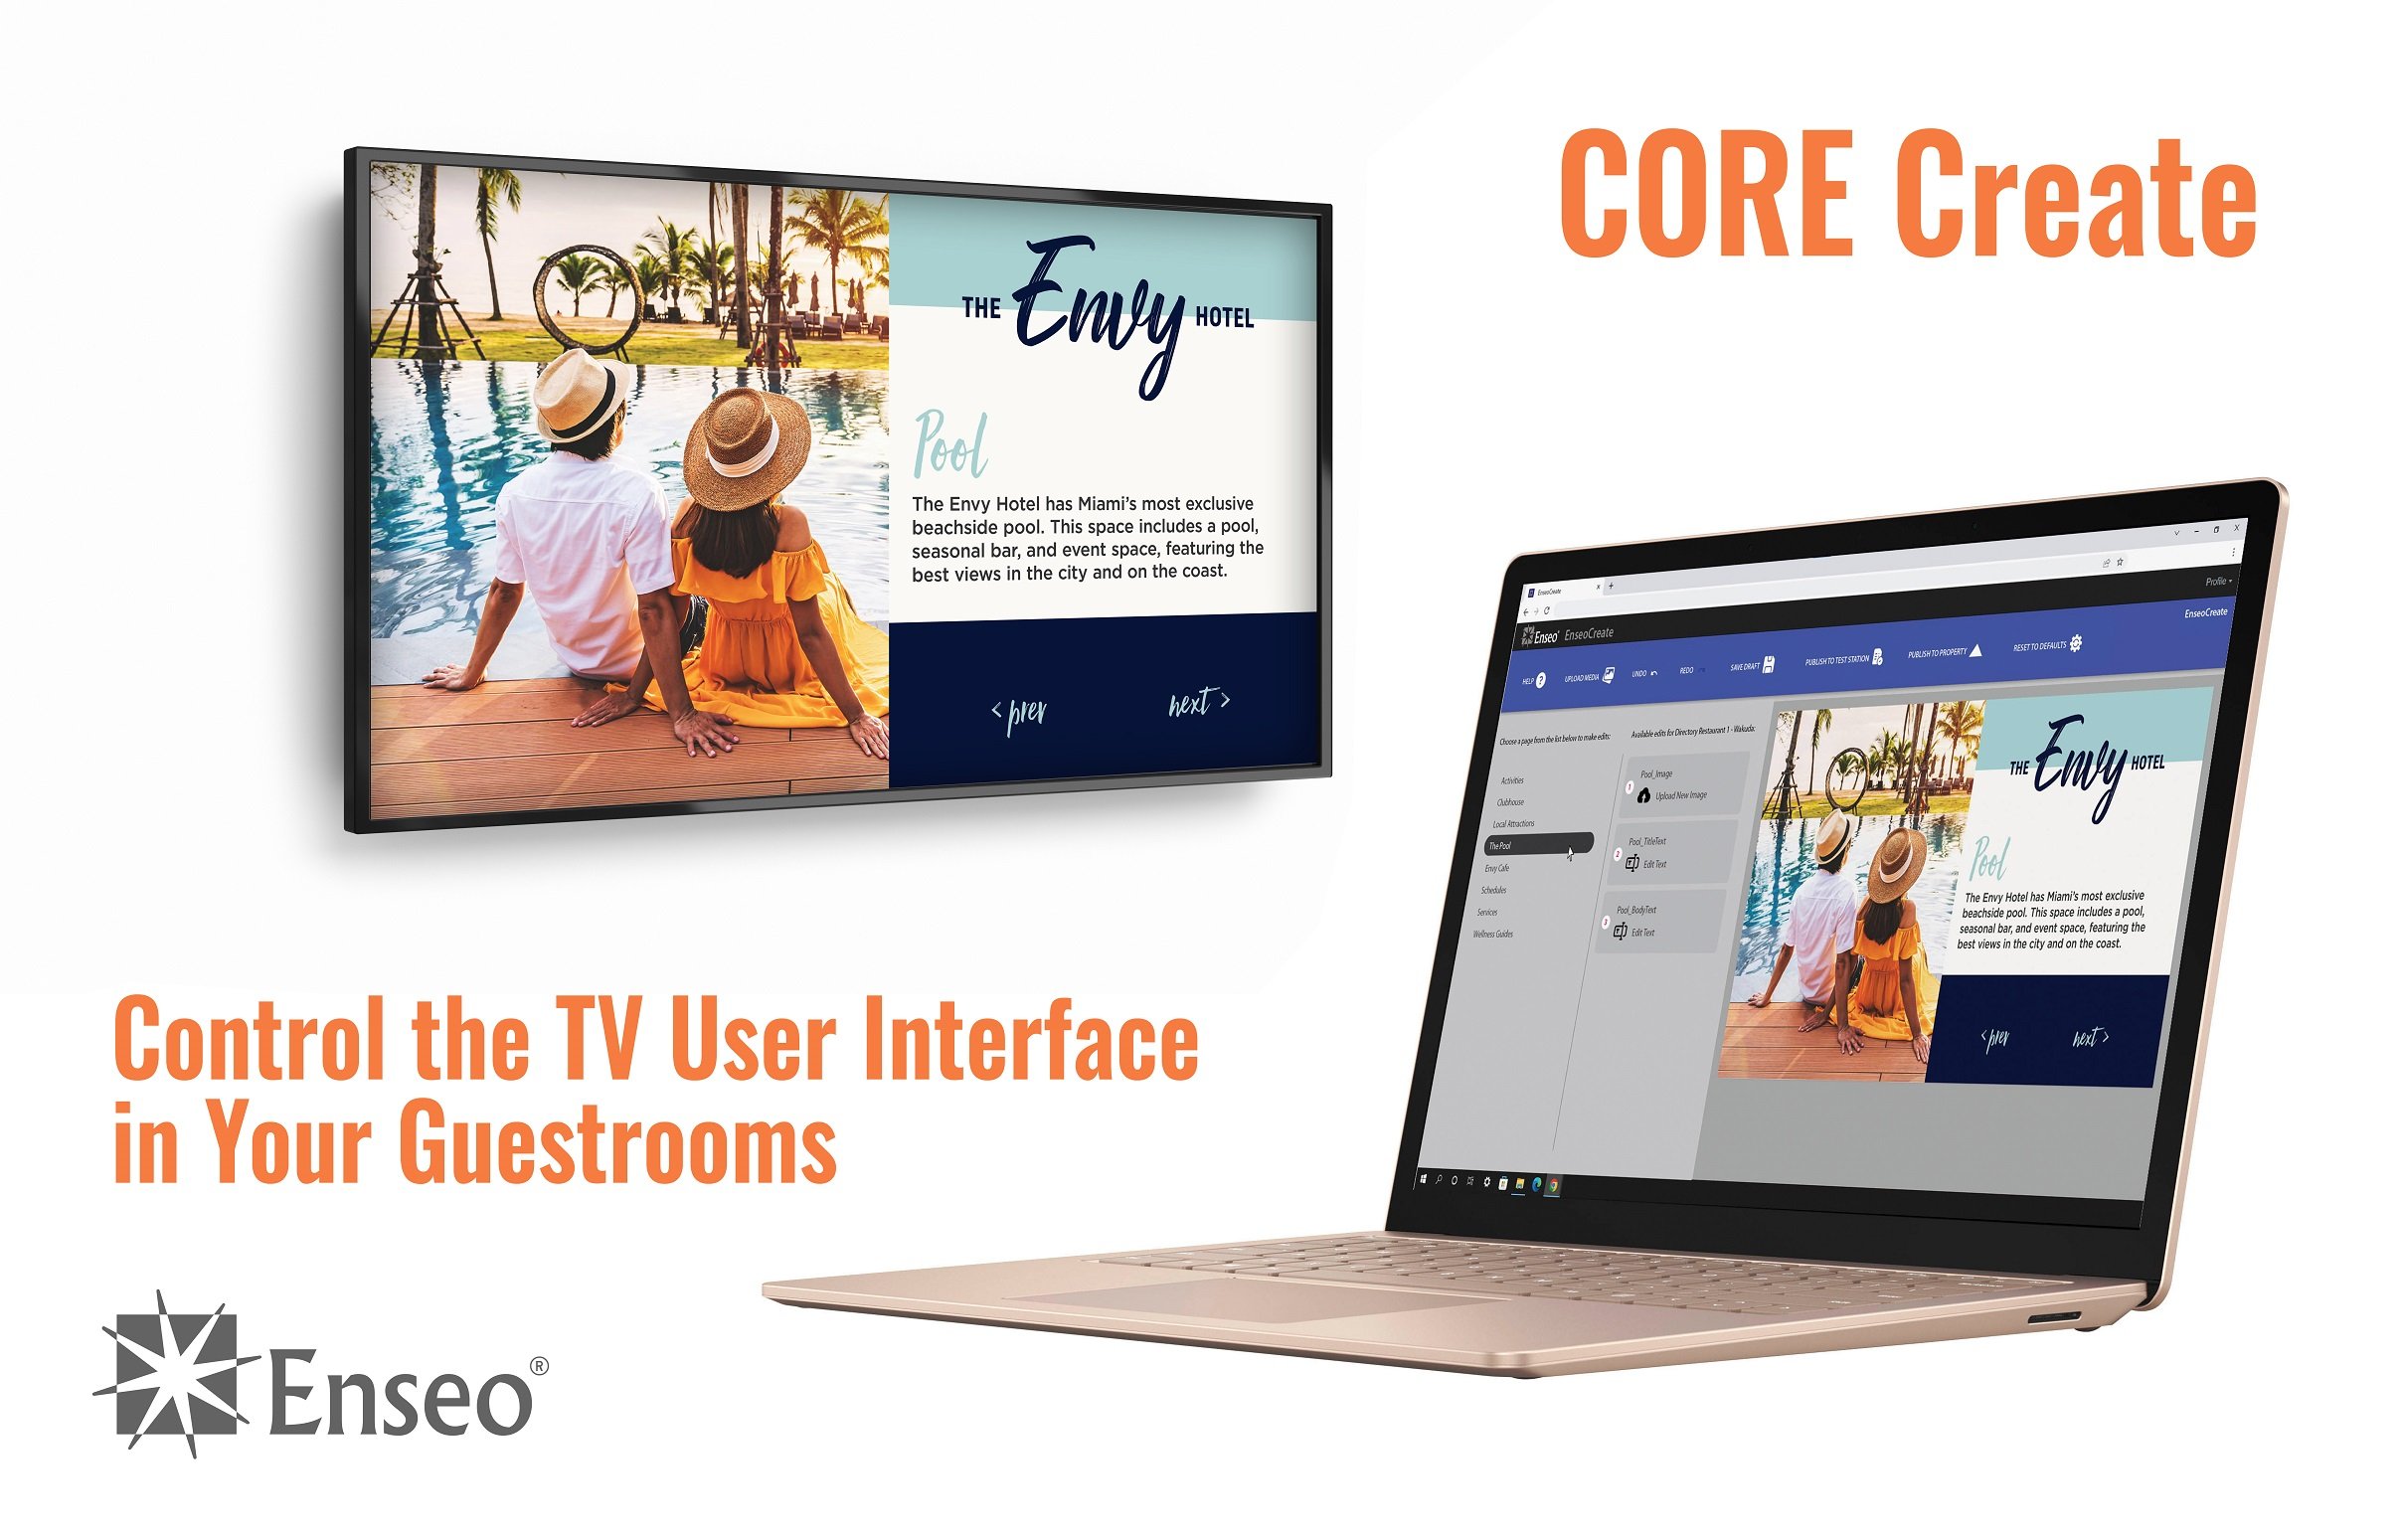 CORE Create from Enseo